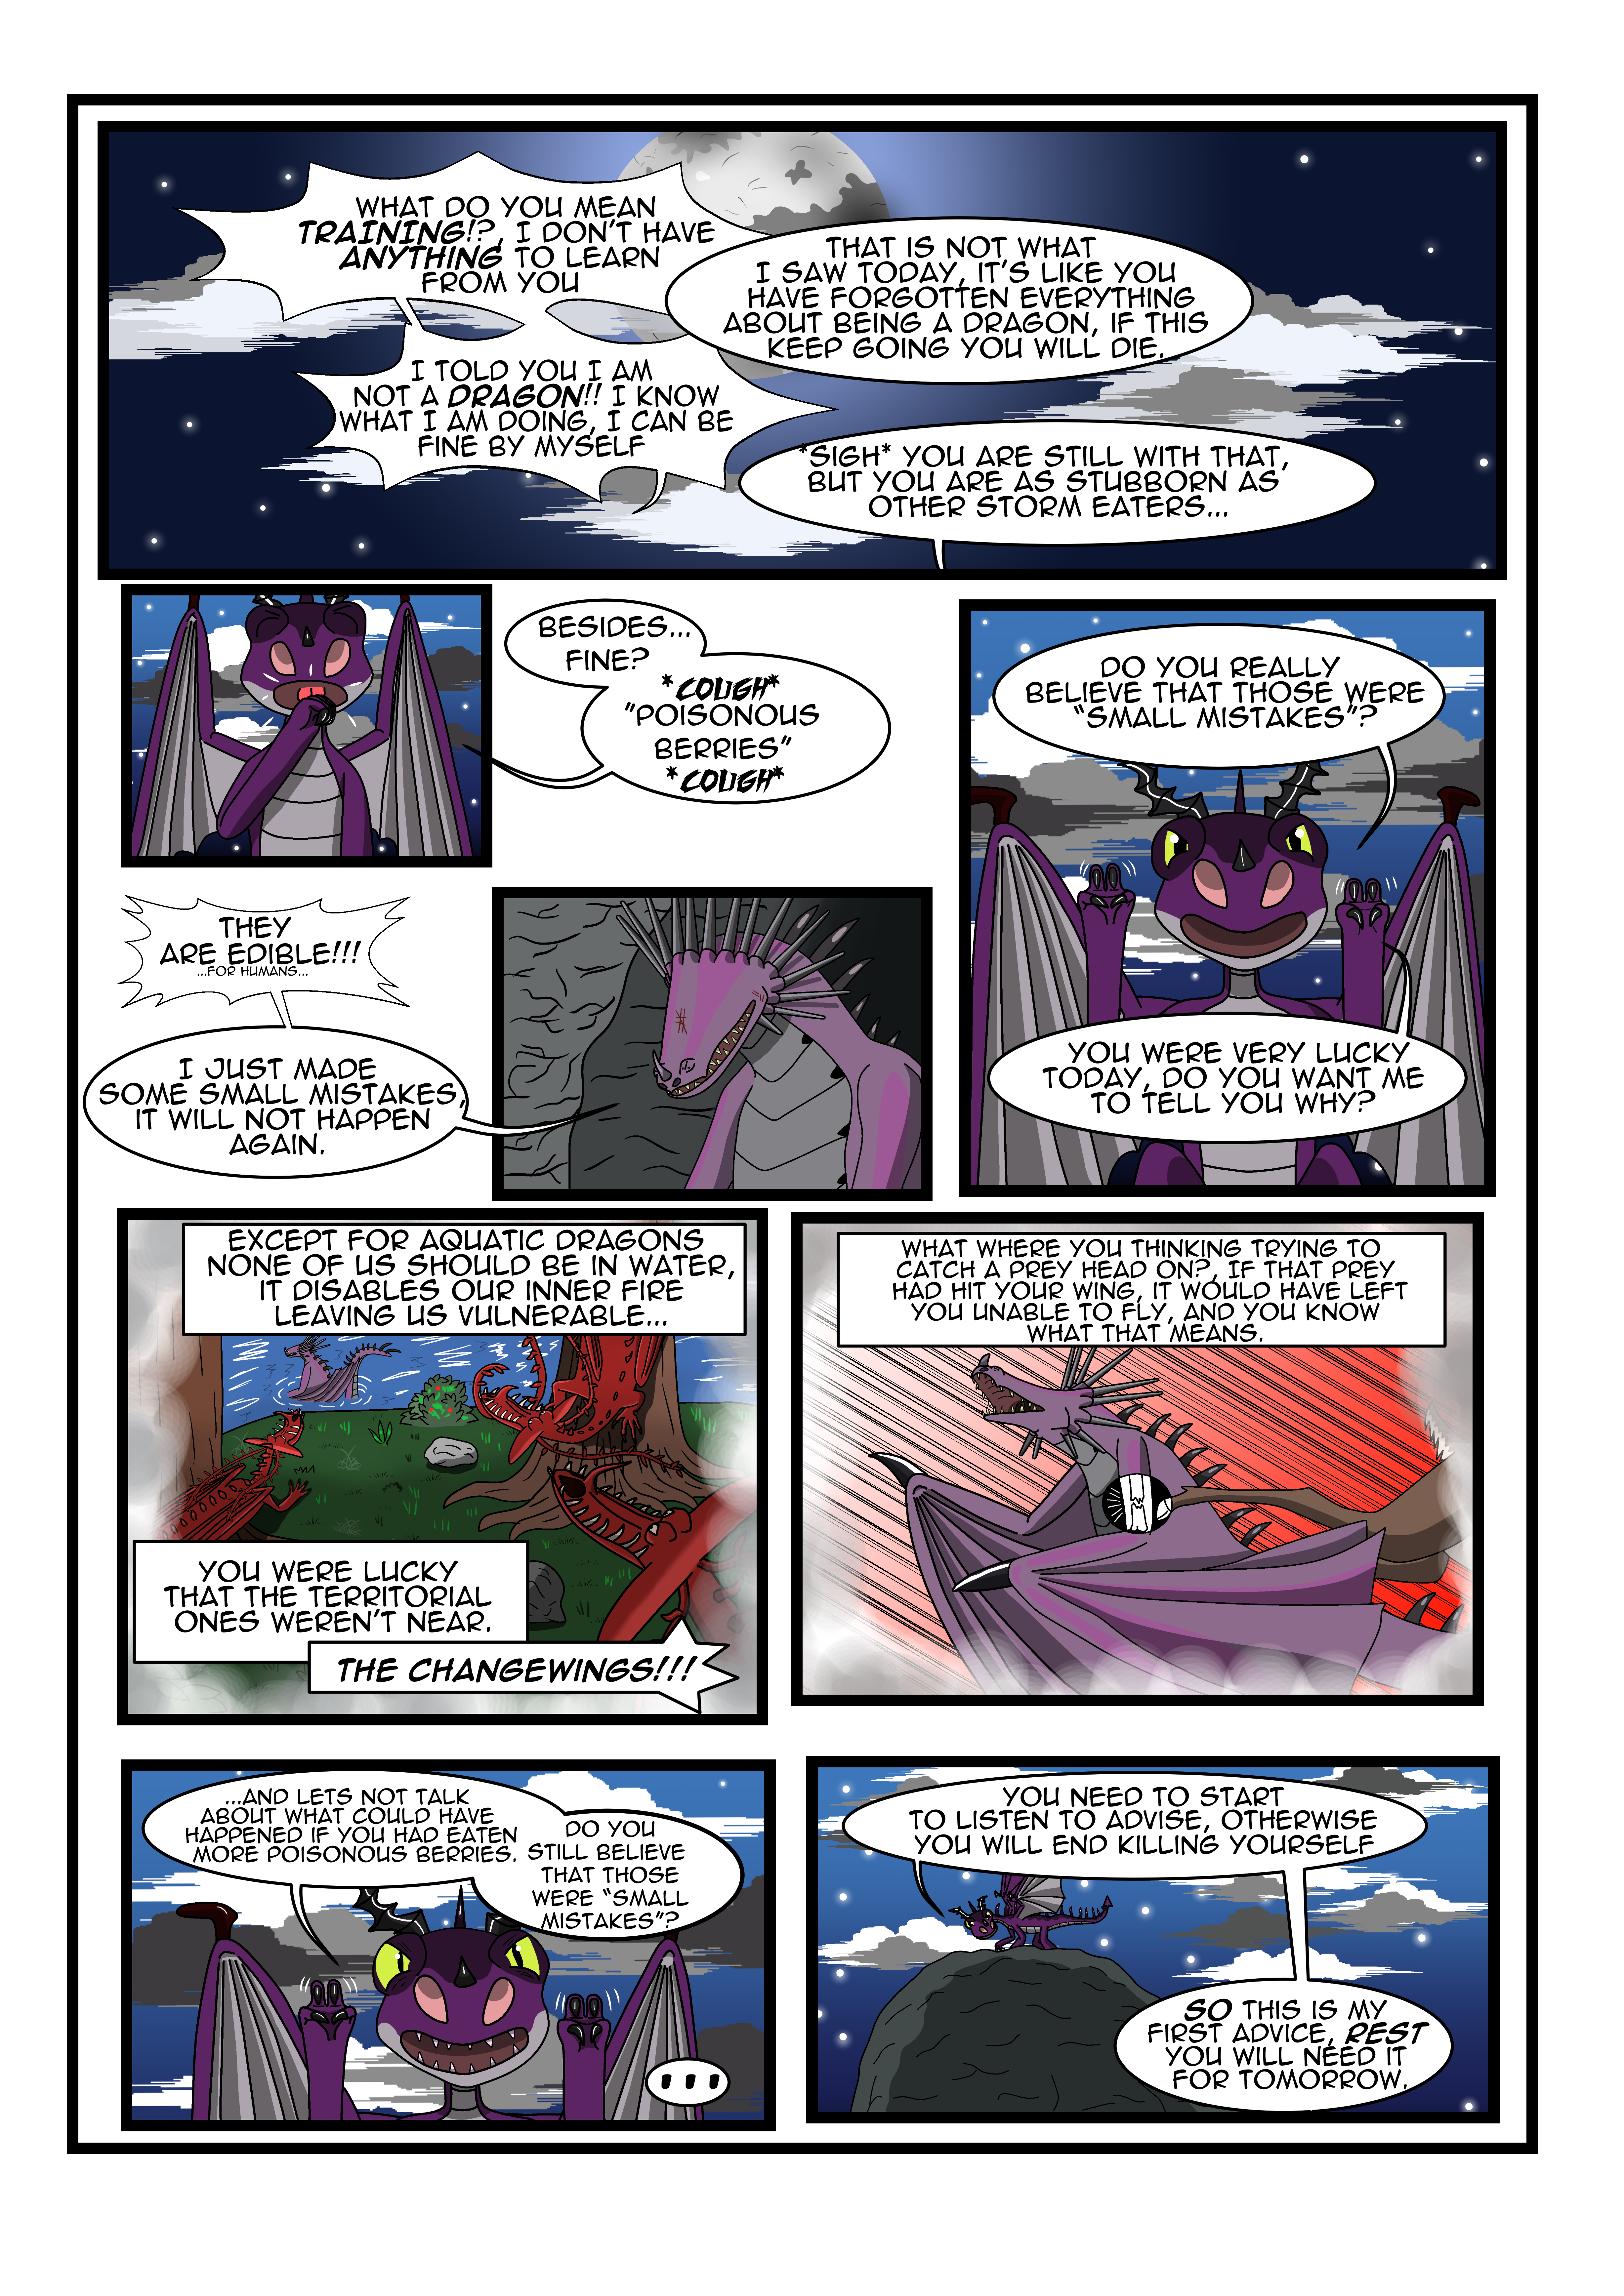 Coming Storm Ch 2 PG 42 By 180984 -- Fur Affinity [Dot] Net